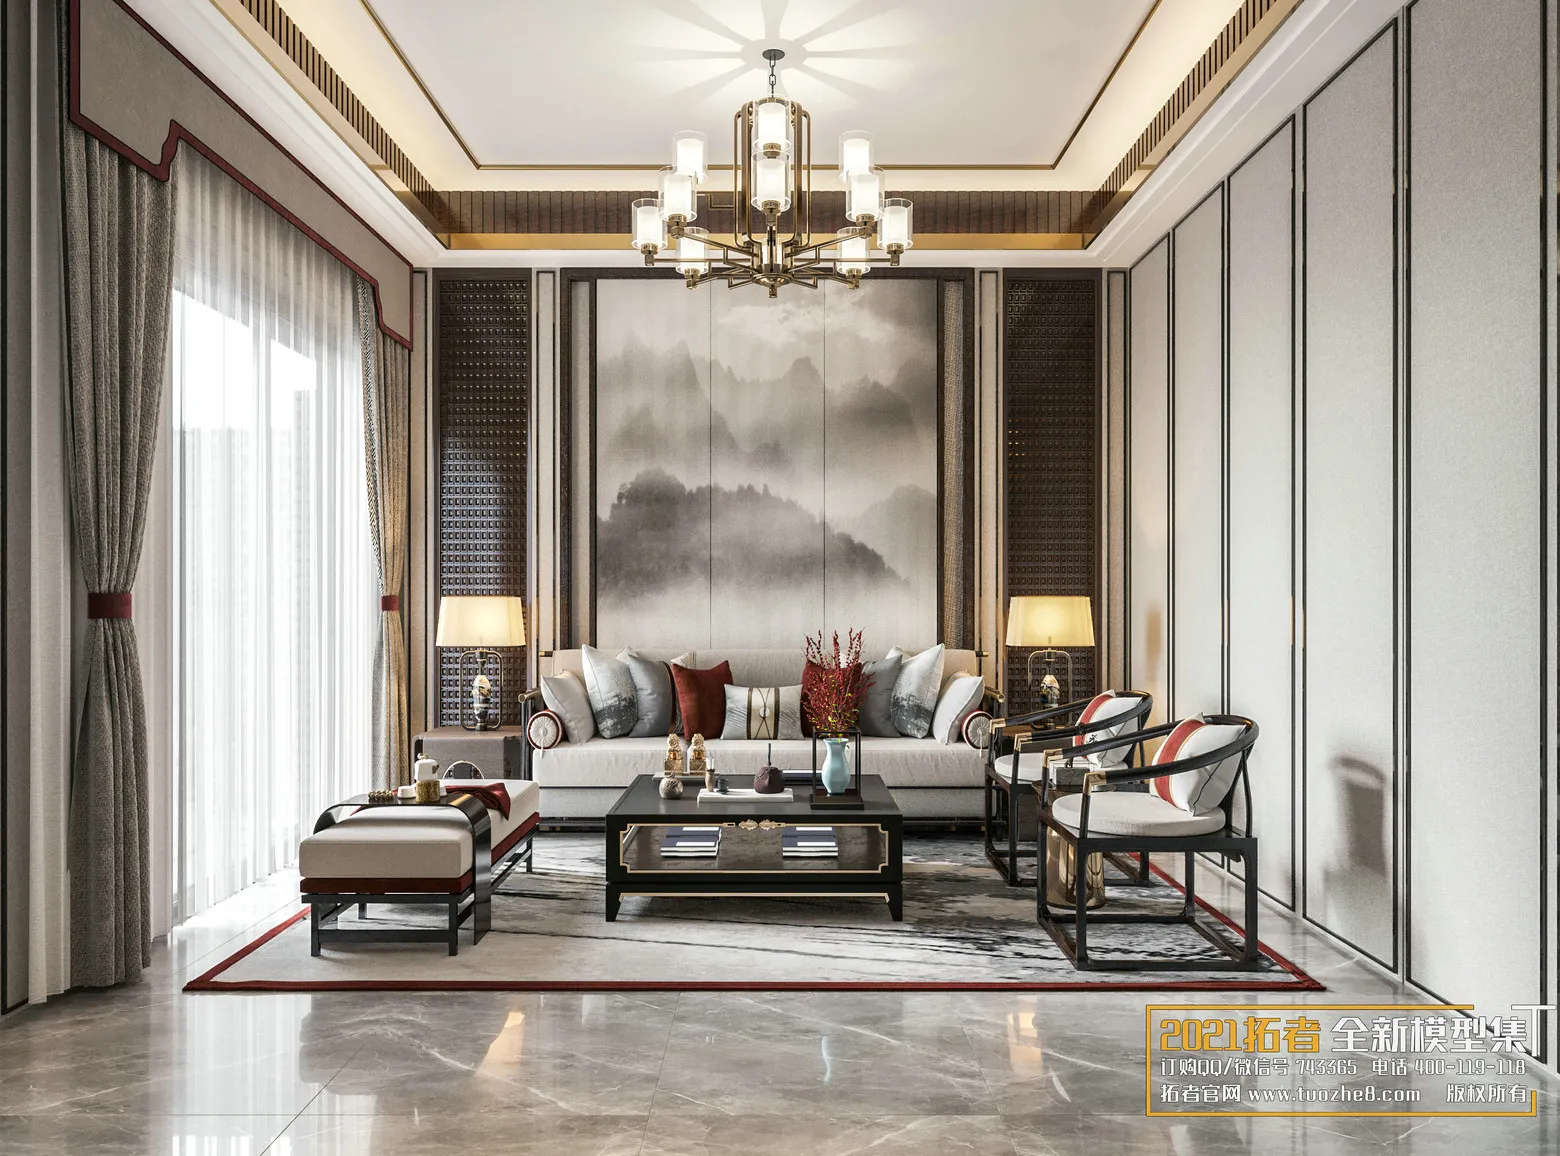 EXTENSION 2021 – 1. LIVING ROOM – 1.2. CHINESE STYLES – 20 – CORONA